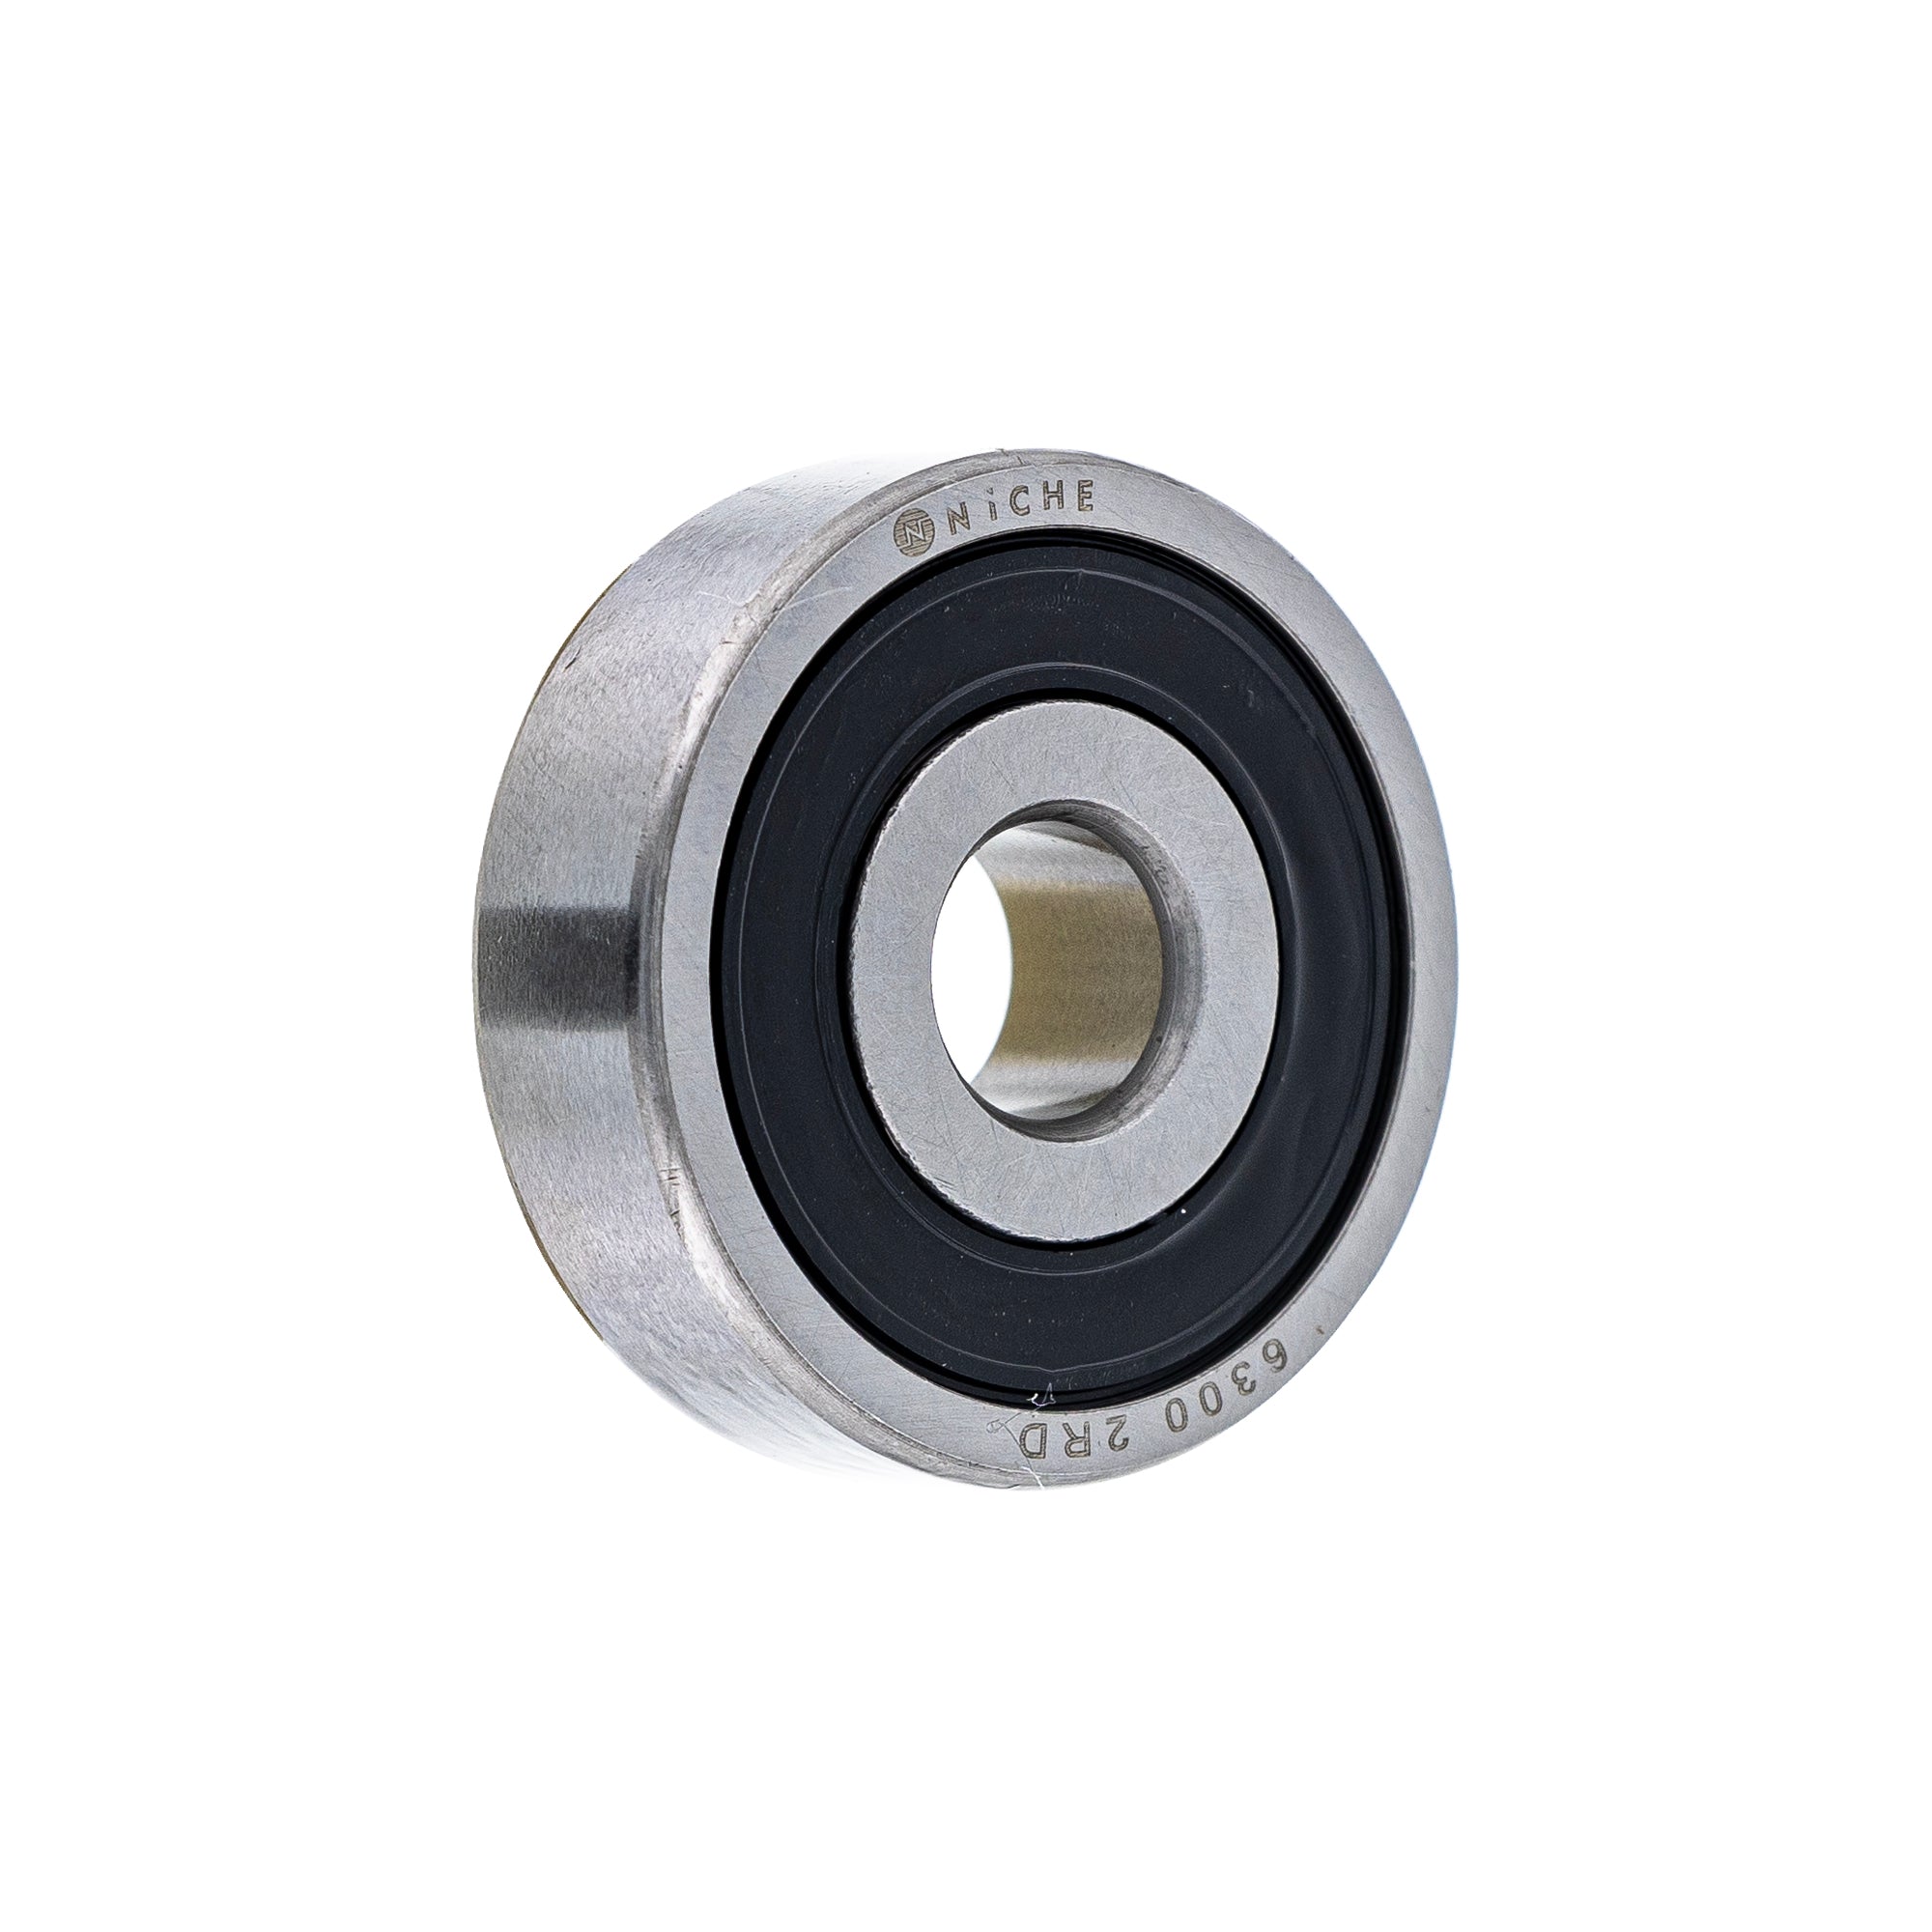 Electric Grade, Single Row, Deep Groove, Ball Bearing for zOTHER RD60 NICHE 519-CBB2331R